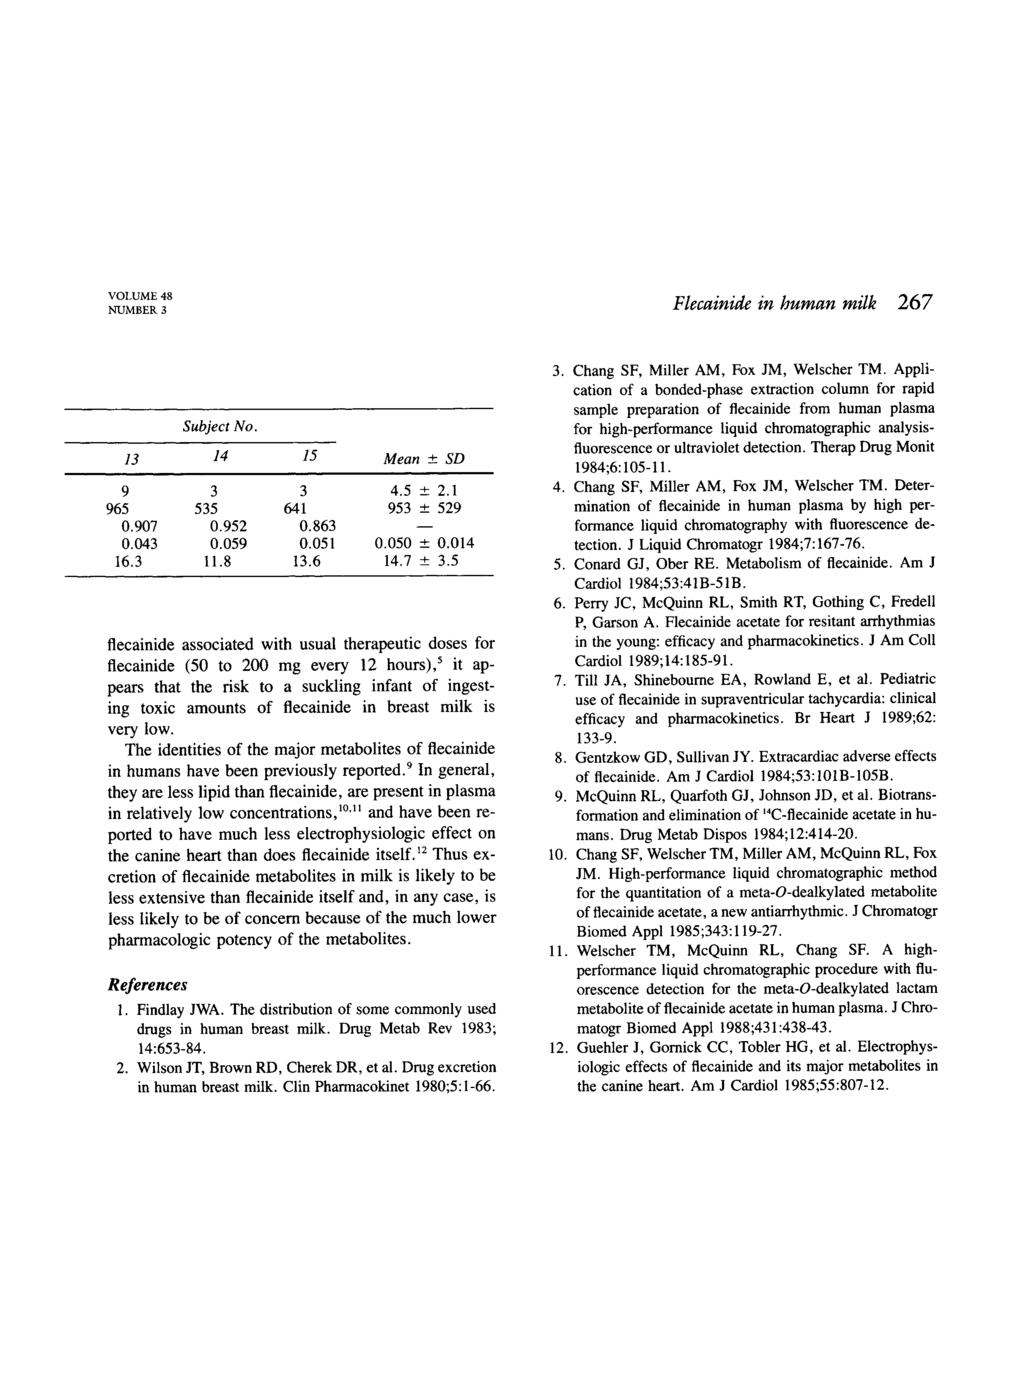 VOLUME 48 NUMBER 3 Flecainide in human milk 267 flecainide associated with usual therapeutic doses for flecainide (50 to 200 mg every 12 hours),5 it appears that the risk to a suckling infant of